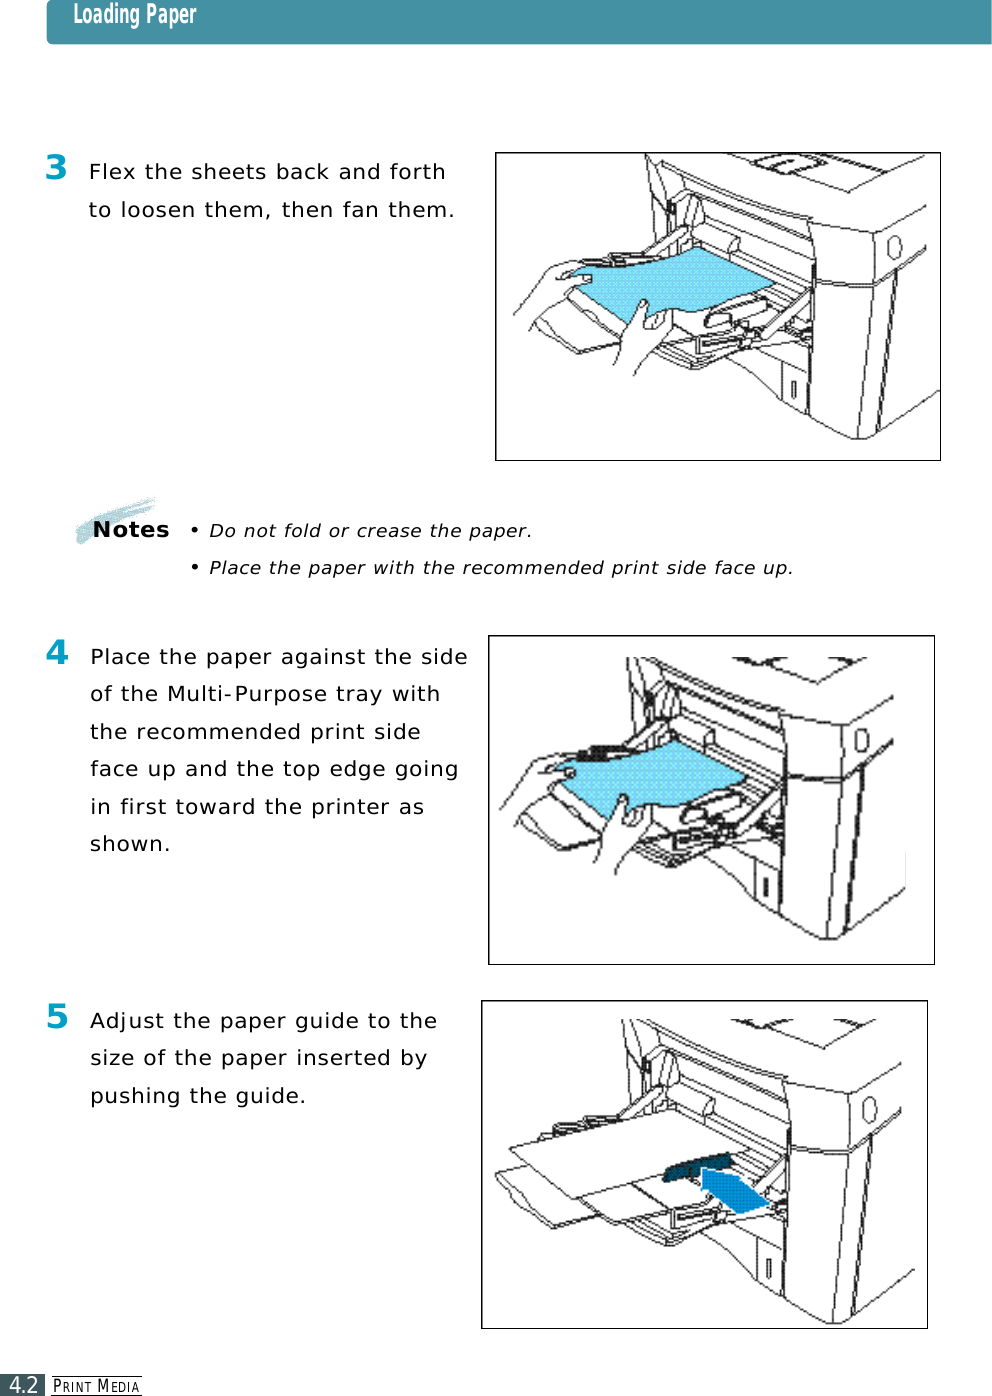 PR I N T ME D I A4.2Notes  • Do not fold or crease the paper.• Place the paper with the recommended print side face up.3Flex the sheets back and forthto loosen them, then fan them.4Place the paper against the sideof the Multi-Purpose tray withthe recommended print sideface up and the top edge goingin first toward the printer ass h o w n .5Adjust the paper guide to thes i ze of the paper inserted bypushing the guide. Loading Paper